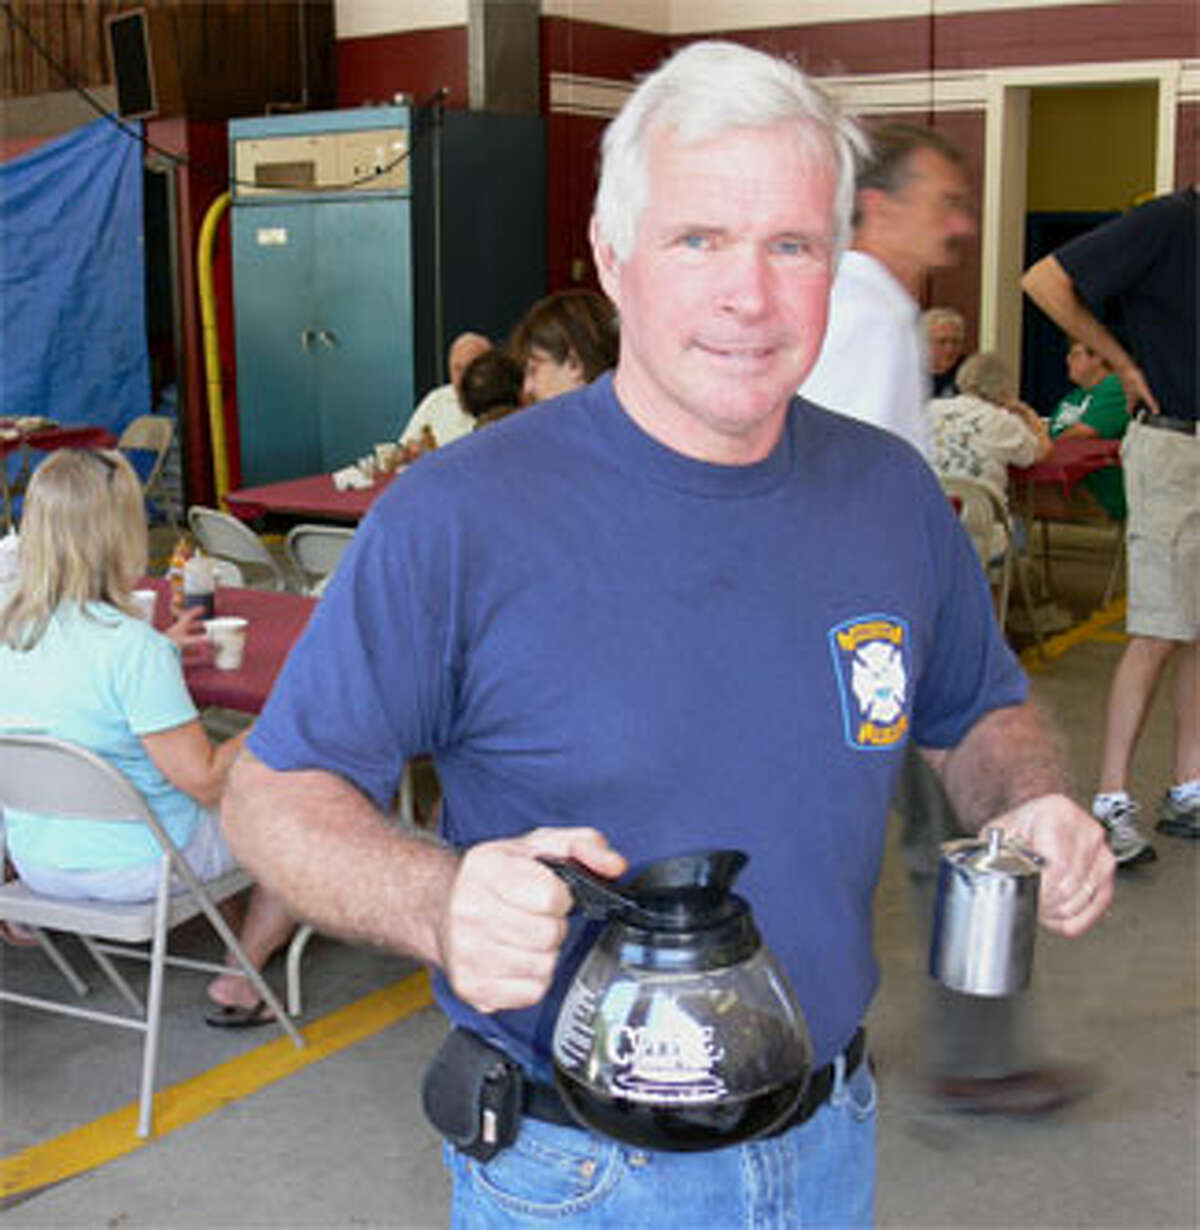 Tony Martinka was pouring fresh coffee for people at the fire company’s breakfast.